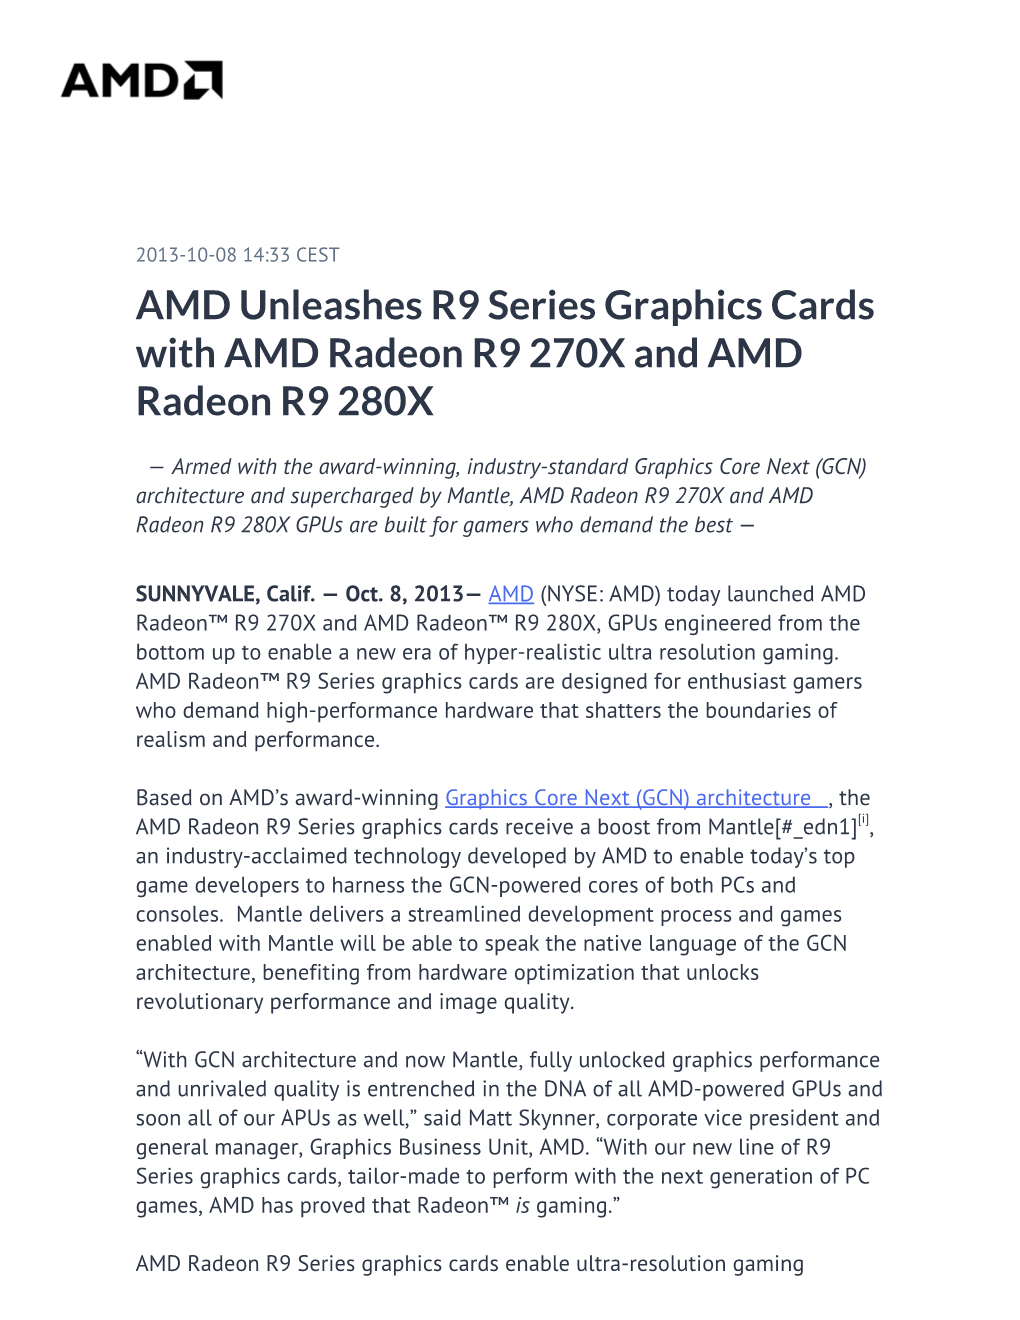 AMD Unleashes R9 Series Graphics Cards with AMD Radeon R9 270X and AMD Radeon R9 280X